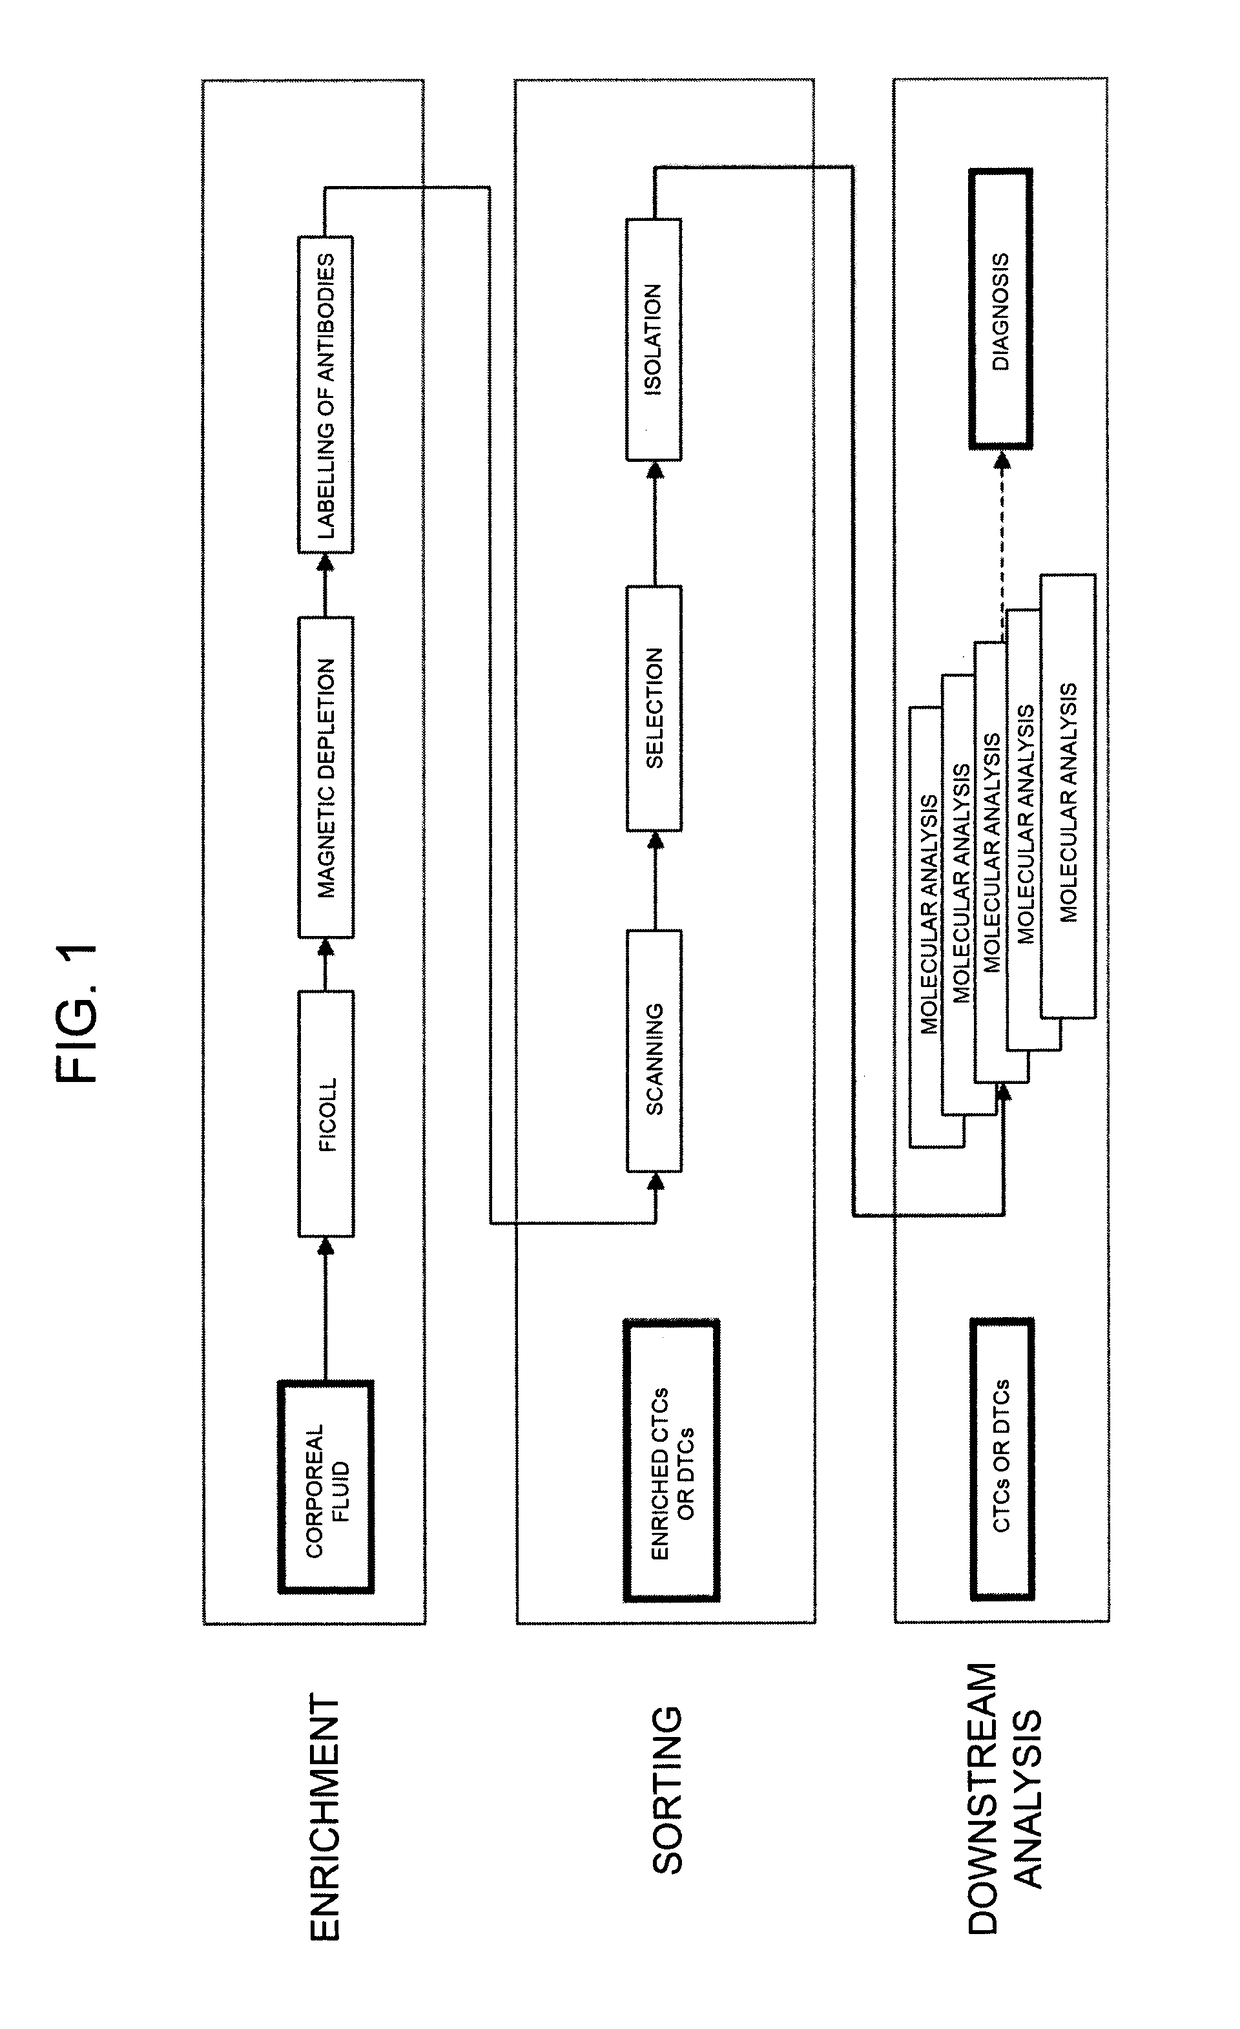 Method for identification, selection and analysis of tumour cells